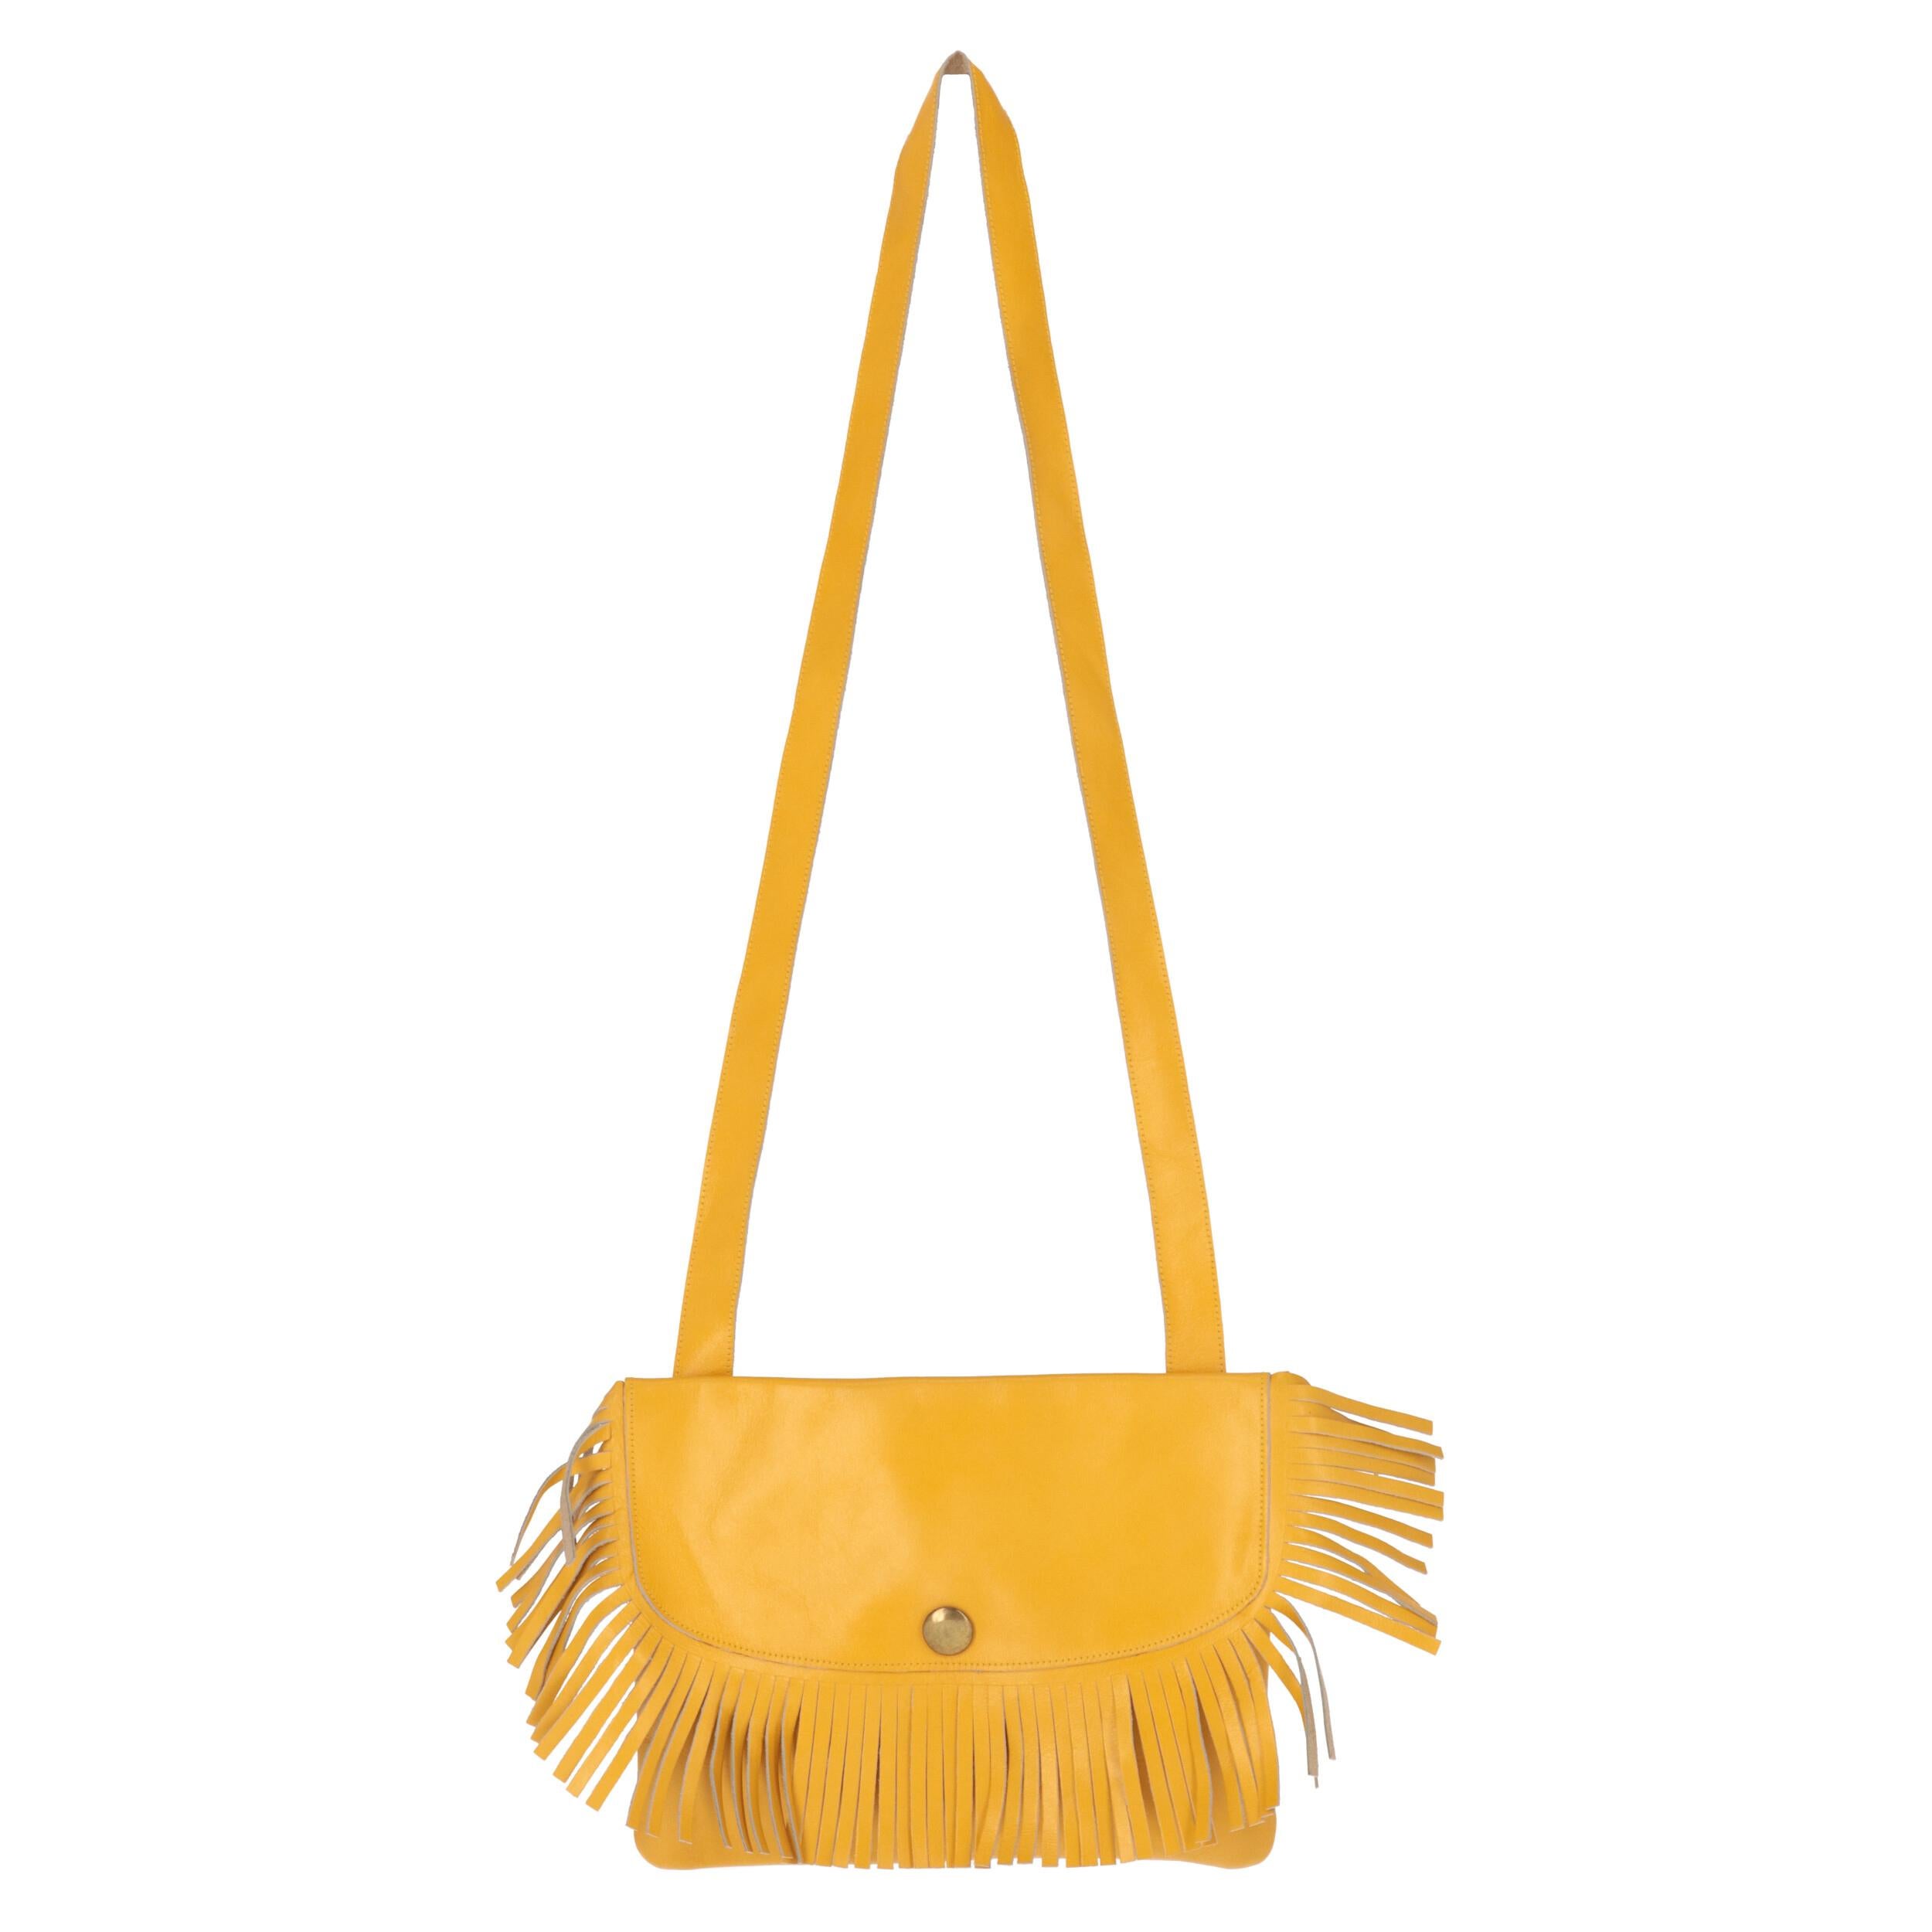 Sonia Rykiel yellow leather shoulder bag, flap with fringes and snap button.

The product has some marks on the leather, as shown in the pictures.
Years: 90s

Made in Italy

Flat measurements

Height: 20 cm
Width: 25 cm
Depth: 1 cm
Shoulder strap